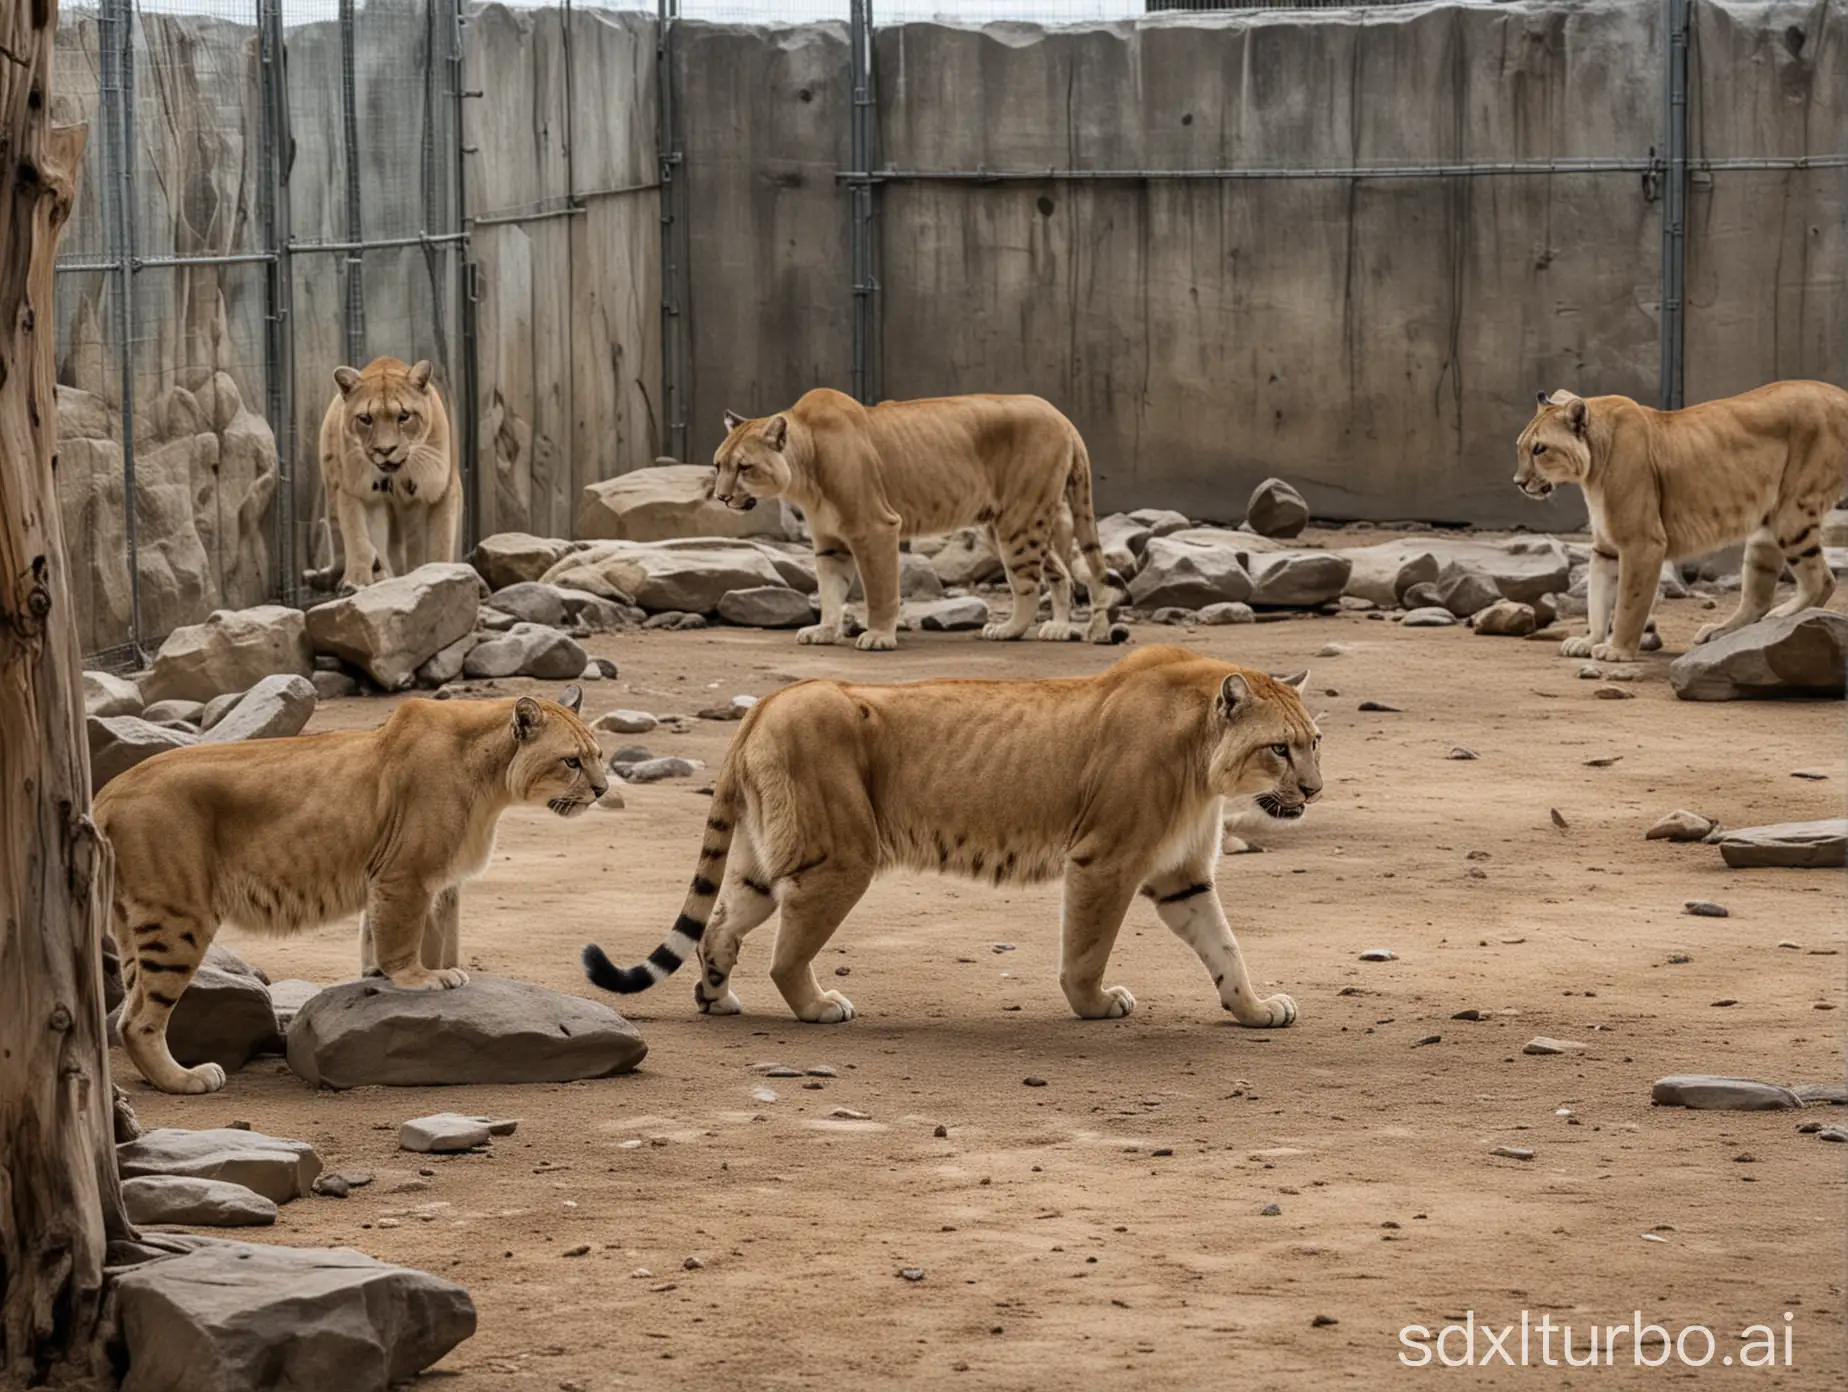 Sabertooth-Cats-in-their-Enclosure-Fascinated-Visitors-at-the-Zoo